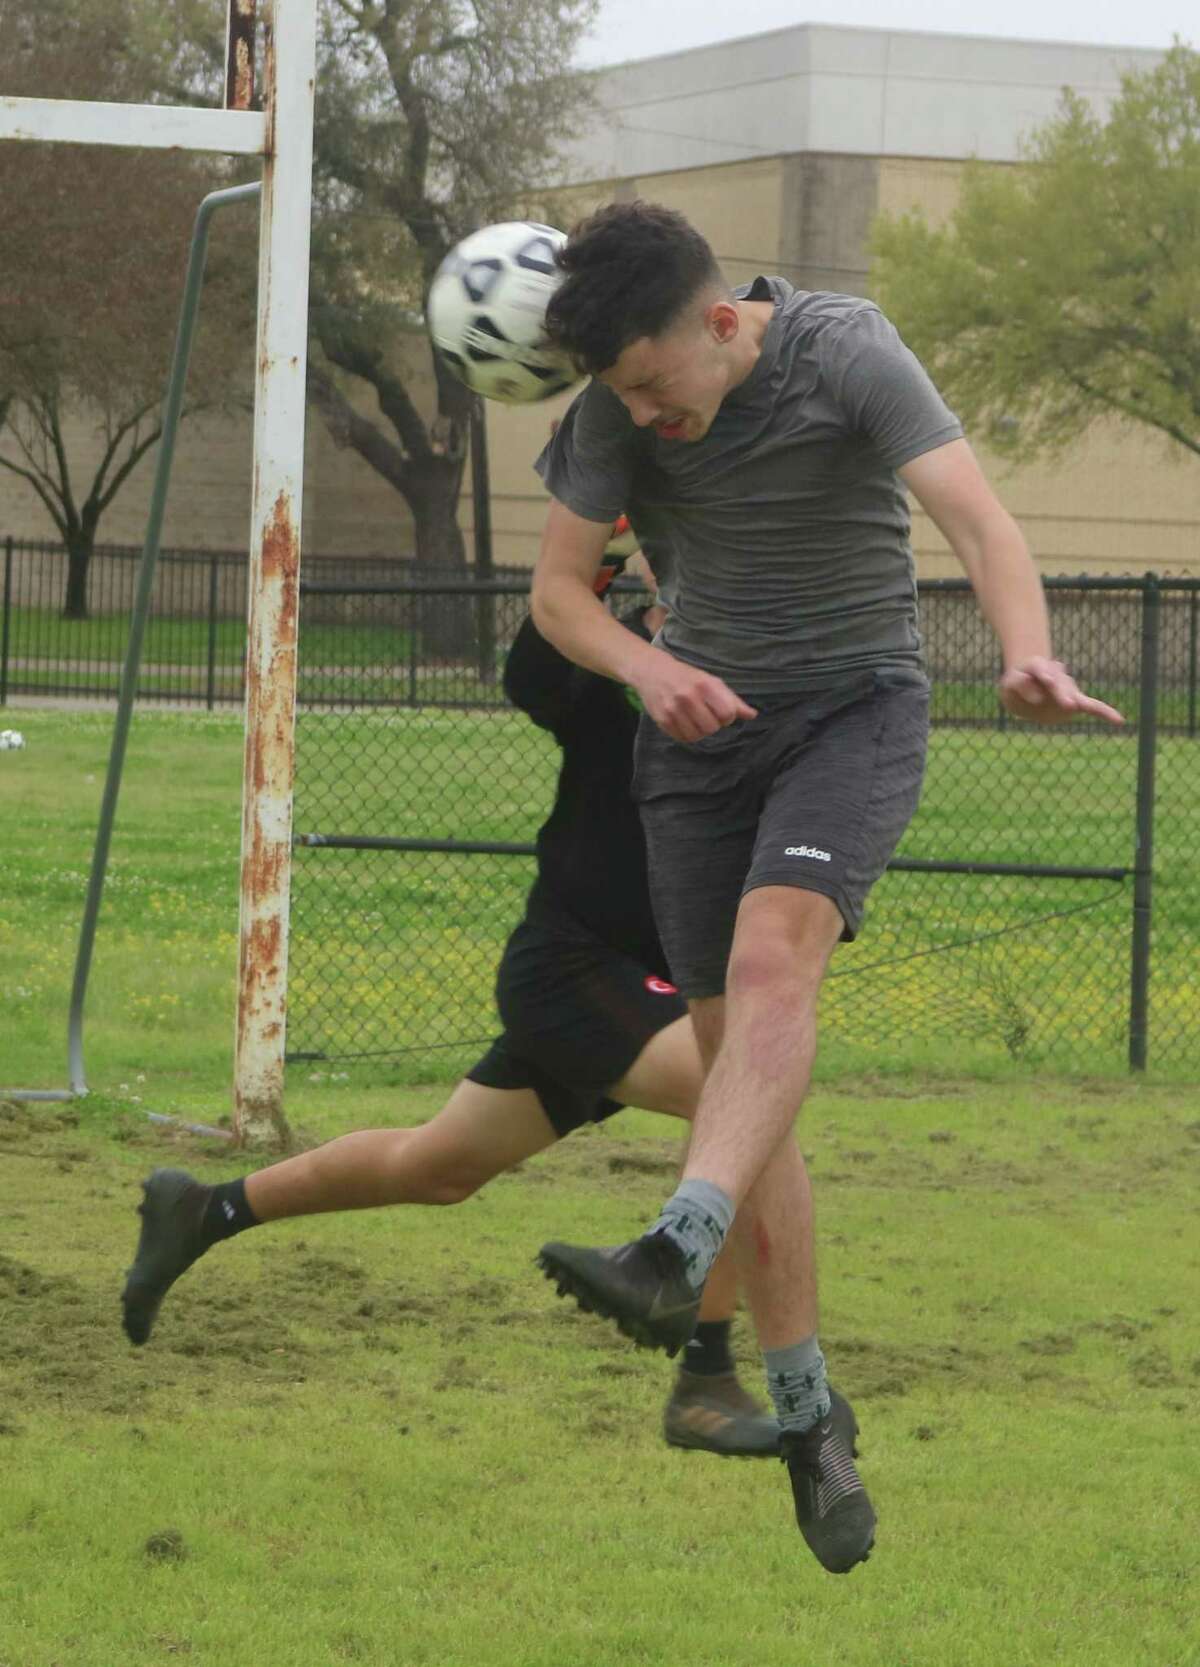 Anthony Almague attempts a header into the goal during Wednesday's practice as the Eagles prepared for their bi-district match with Humble Friday night.